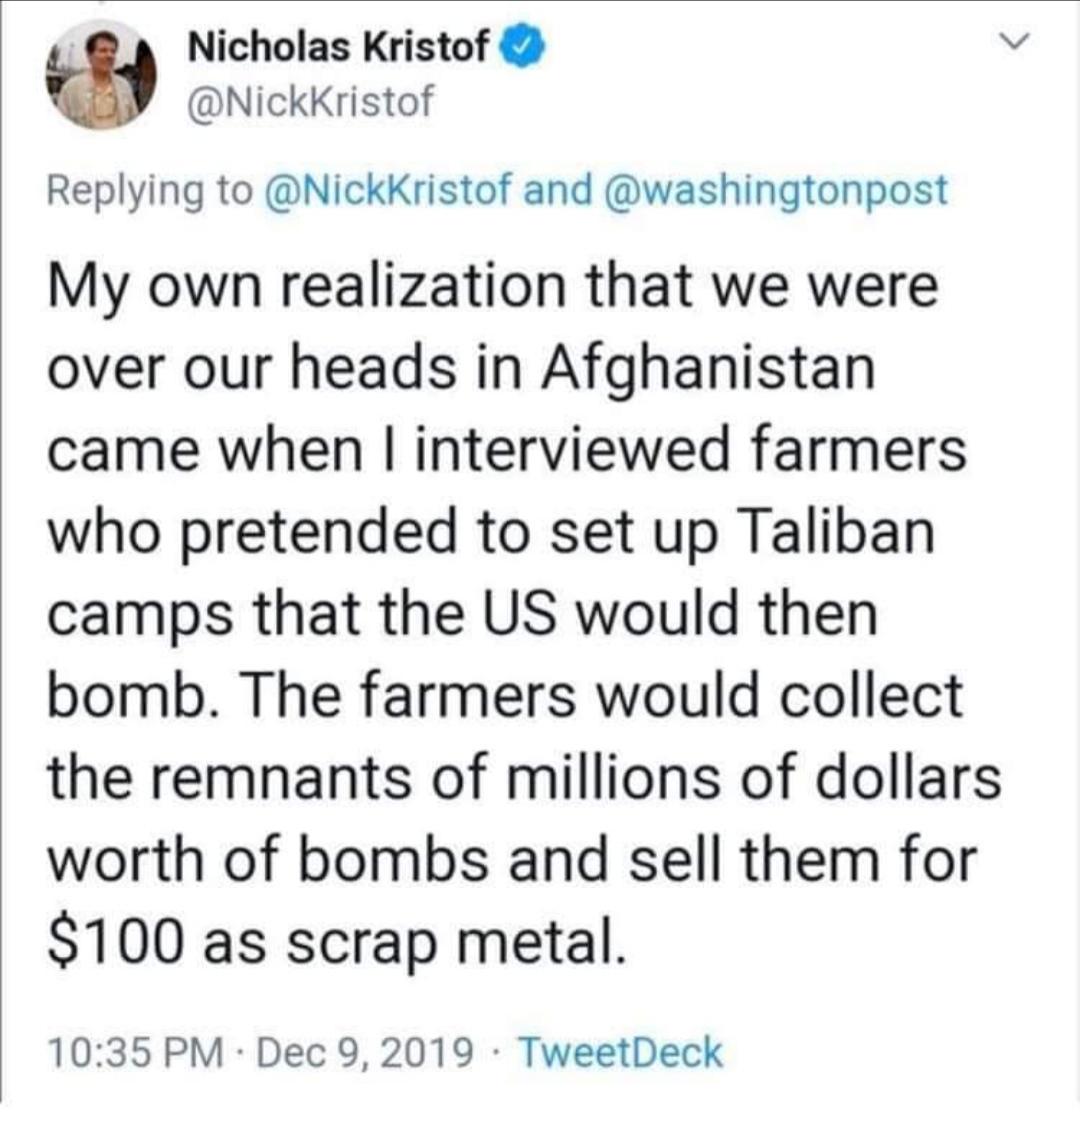 Nicholas Kristof @NickKristof Replying to @NickKristof and @washingtonpost My own realization that we were over our heads in Afghanistan came when I interviewed farmers who pretended to set up Taliban camps that the US would then bomb. The farmers would collect the remnants of millions of dollars worth of bombs and sell them for $100 as scrap metal. 10:35 PM Dec 9, 2019 TweetDeck